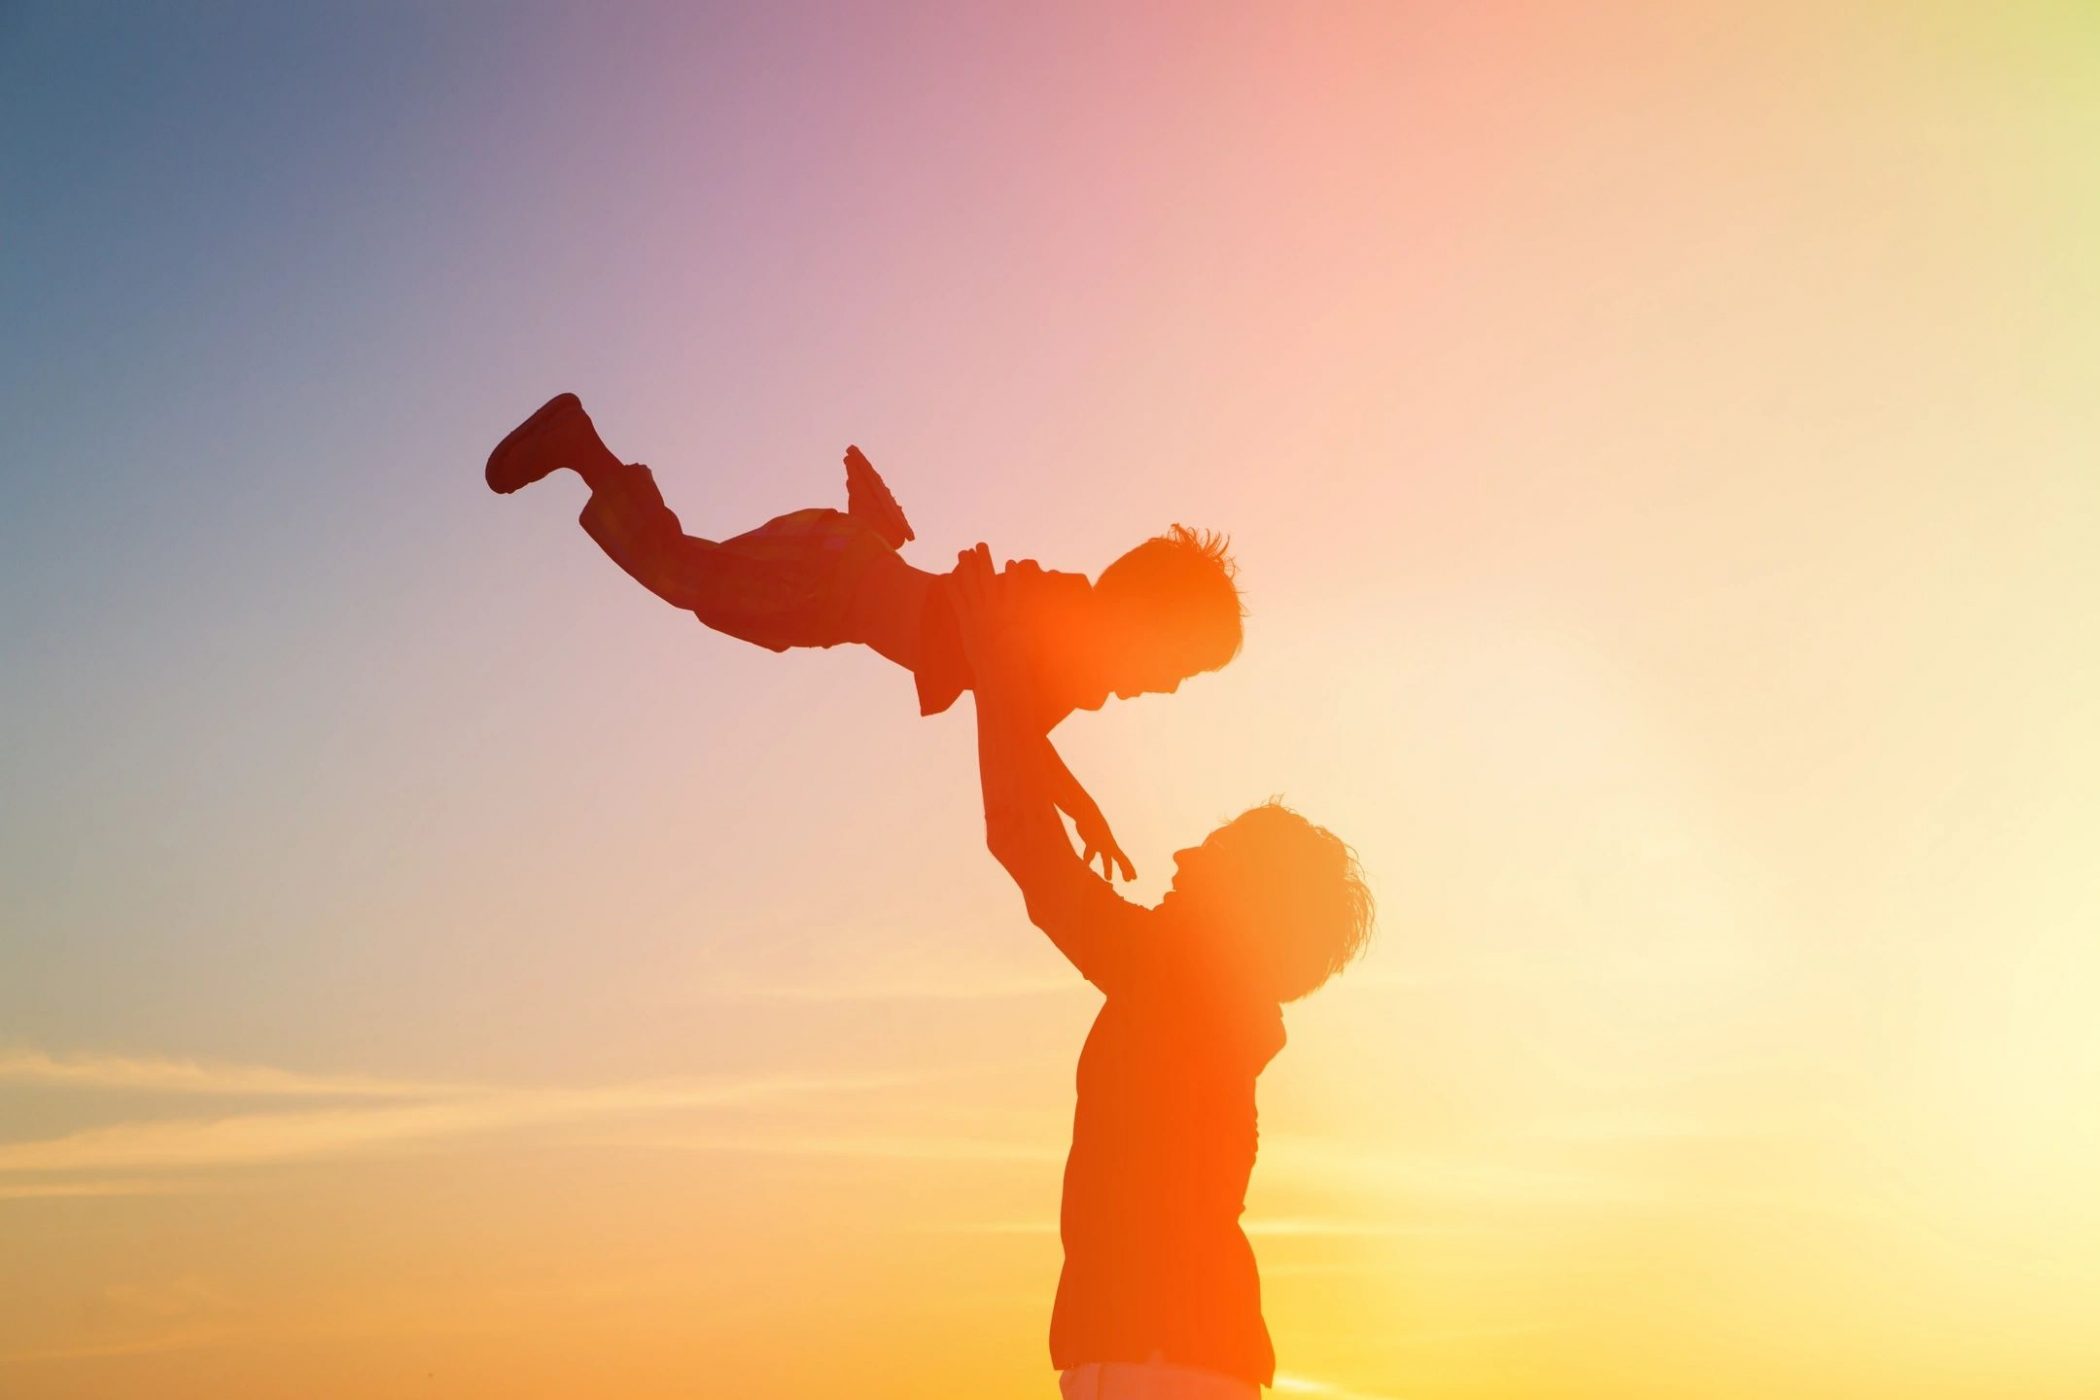 Parent swinging child in sunset like in story by DC widow blog writer Marjorie Brimley